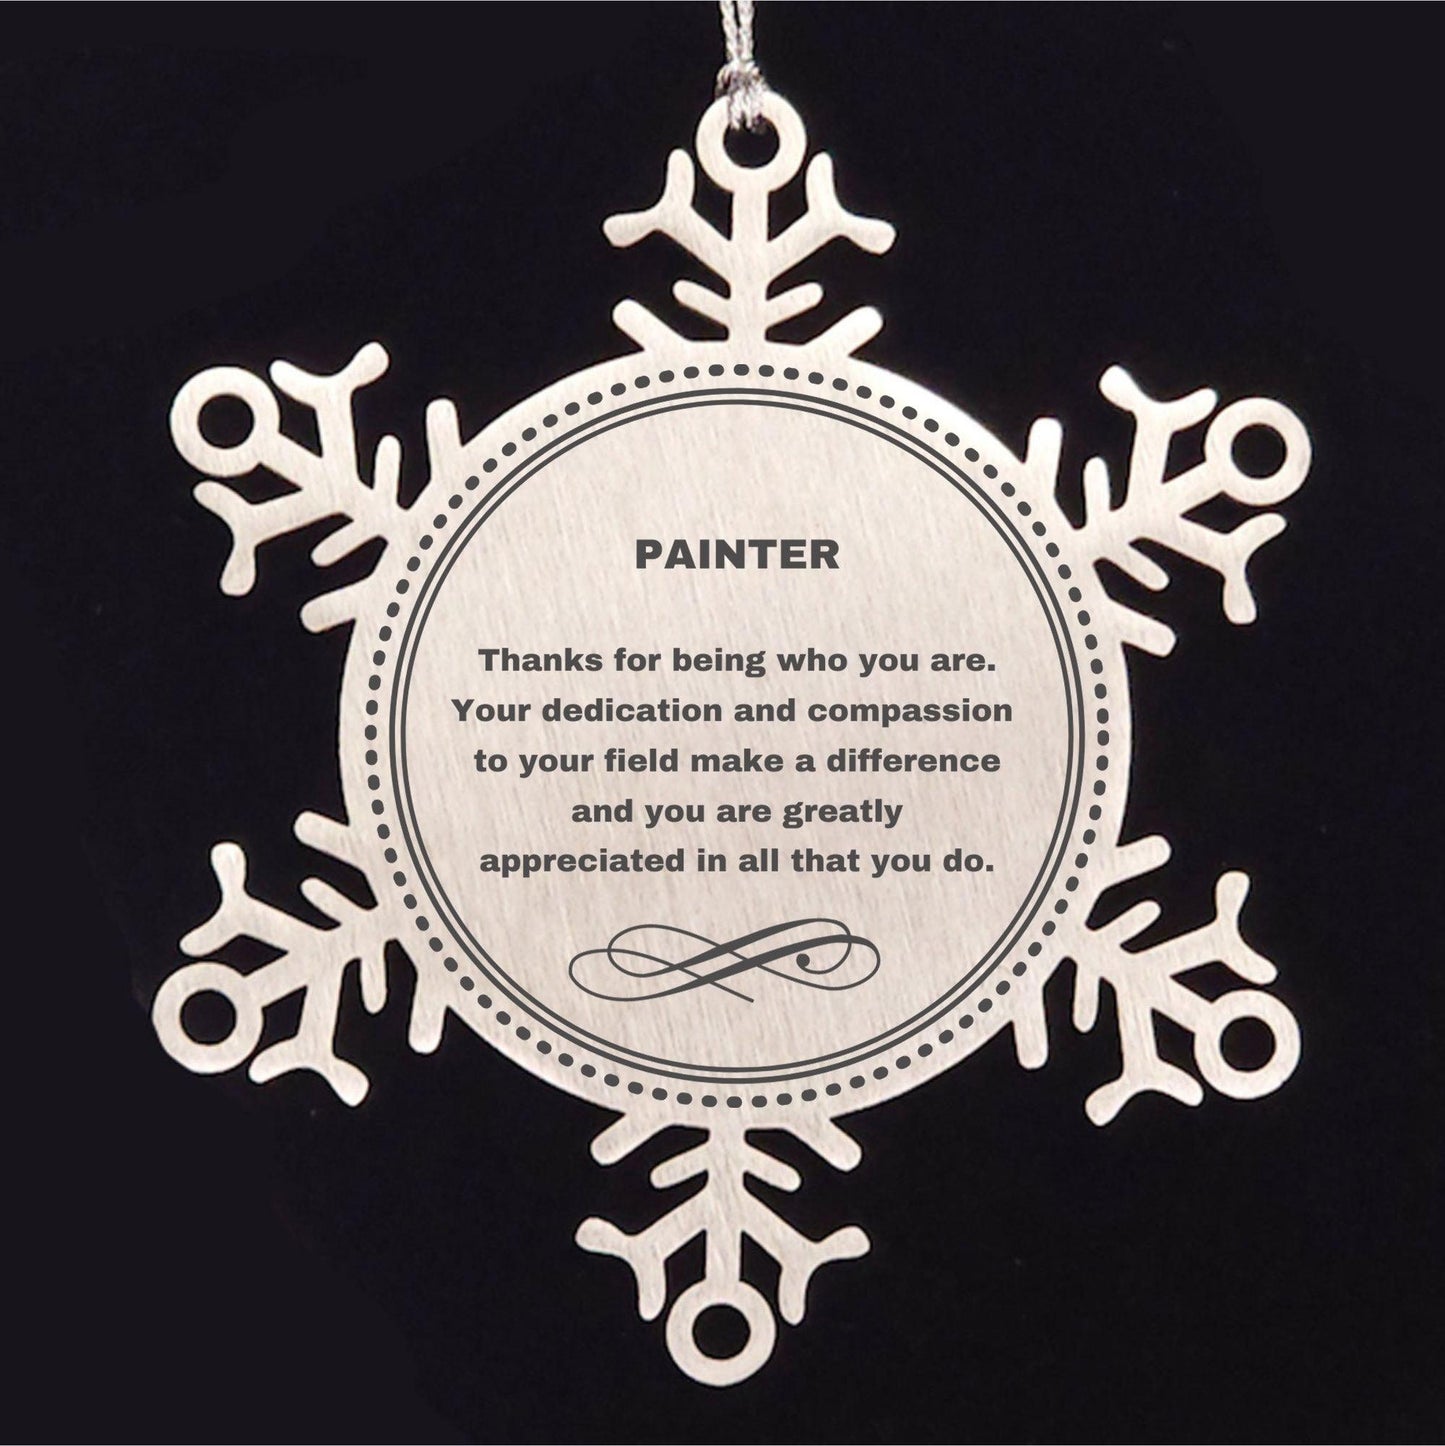 Painter Snowflake Ornament - Thanks for being who you are - Birthday Christmas Jewelry Gifts Coworkers Colleague Boss - Mallard Moon Gift Shop